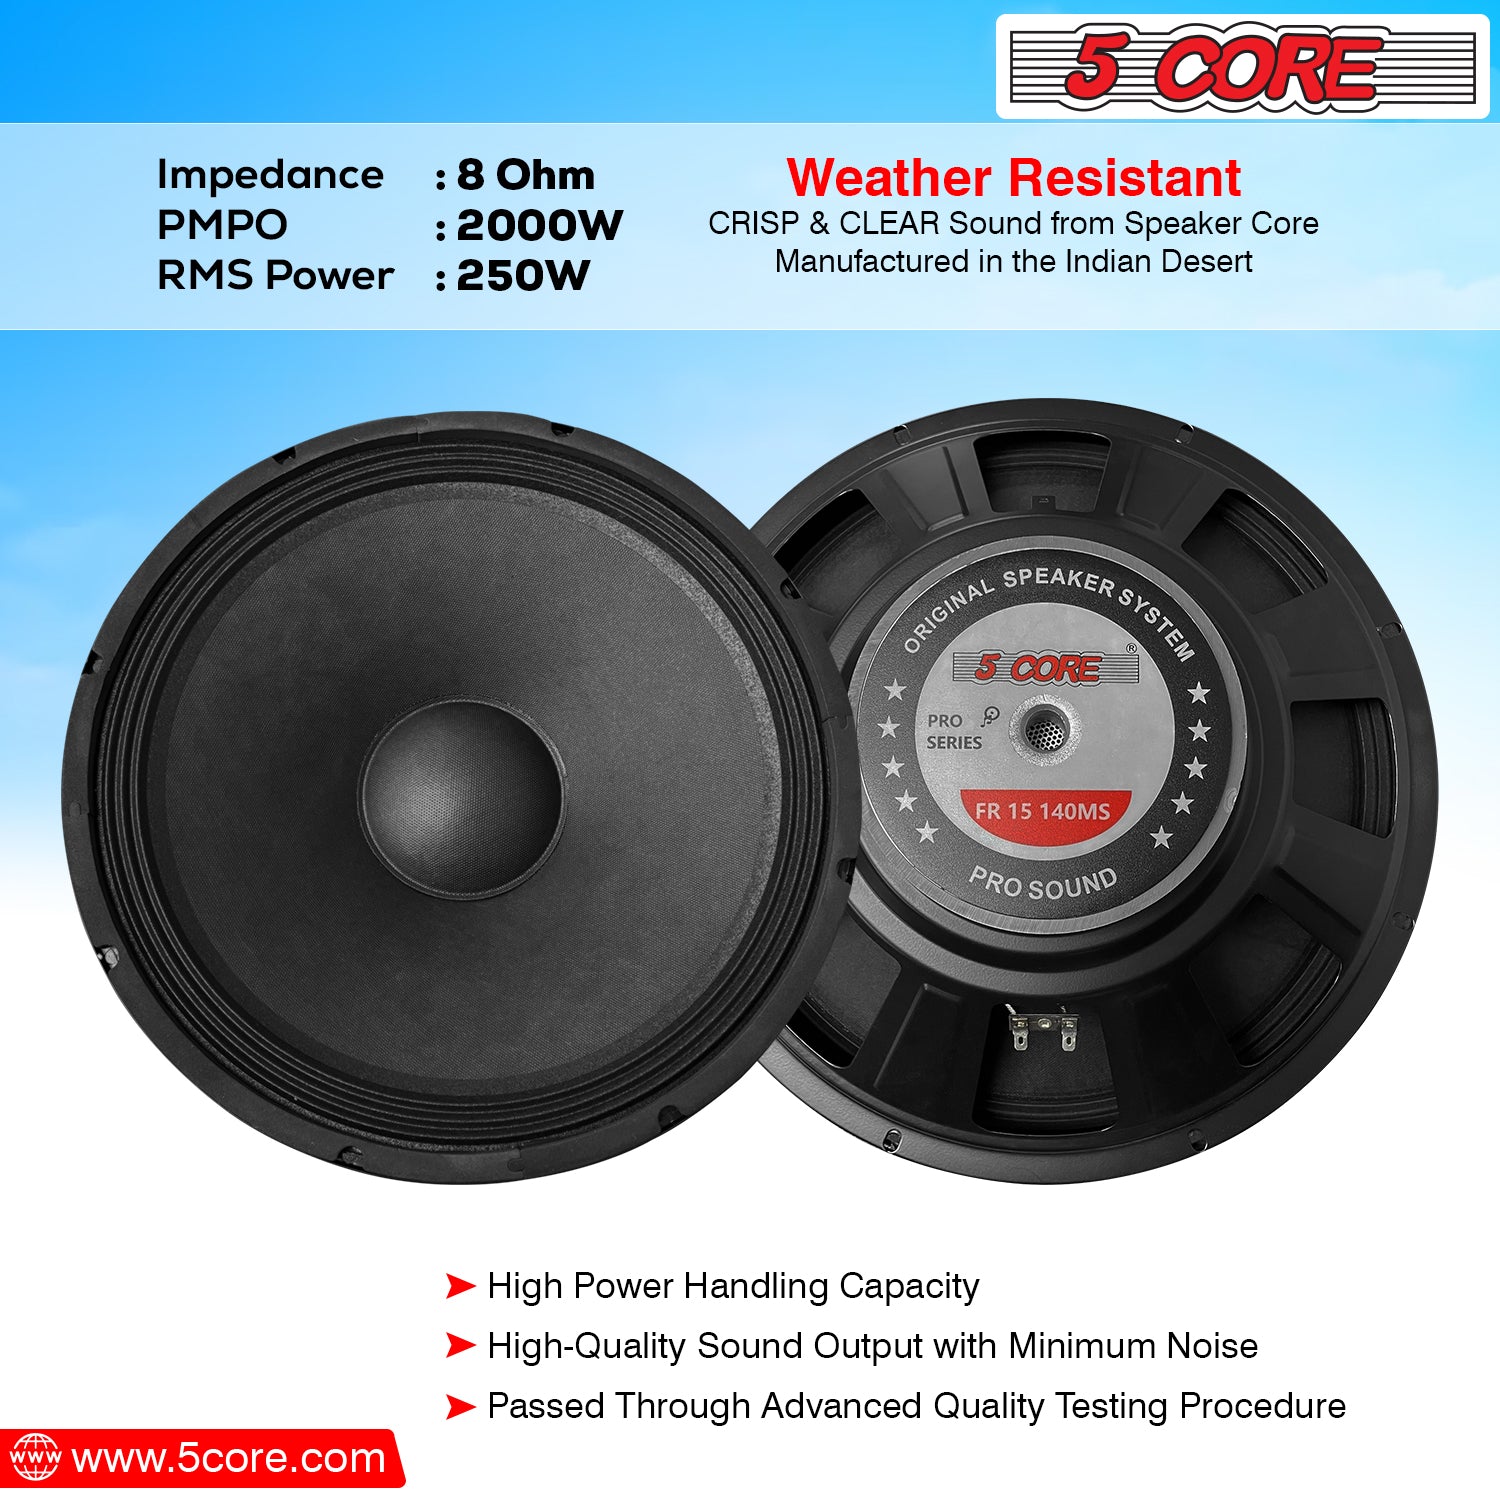 Experience Deep and Rich Bass with 5 Core Speaker